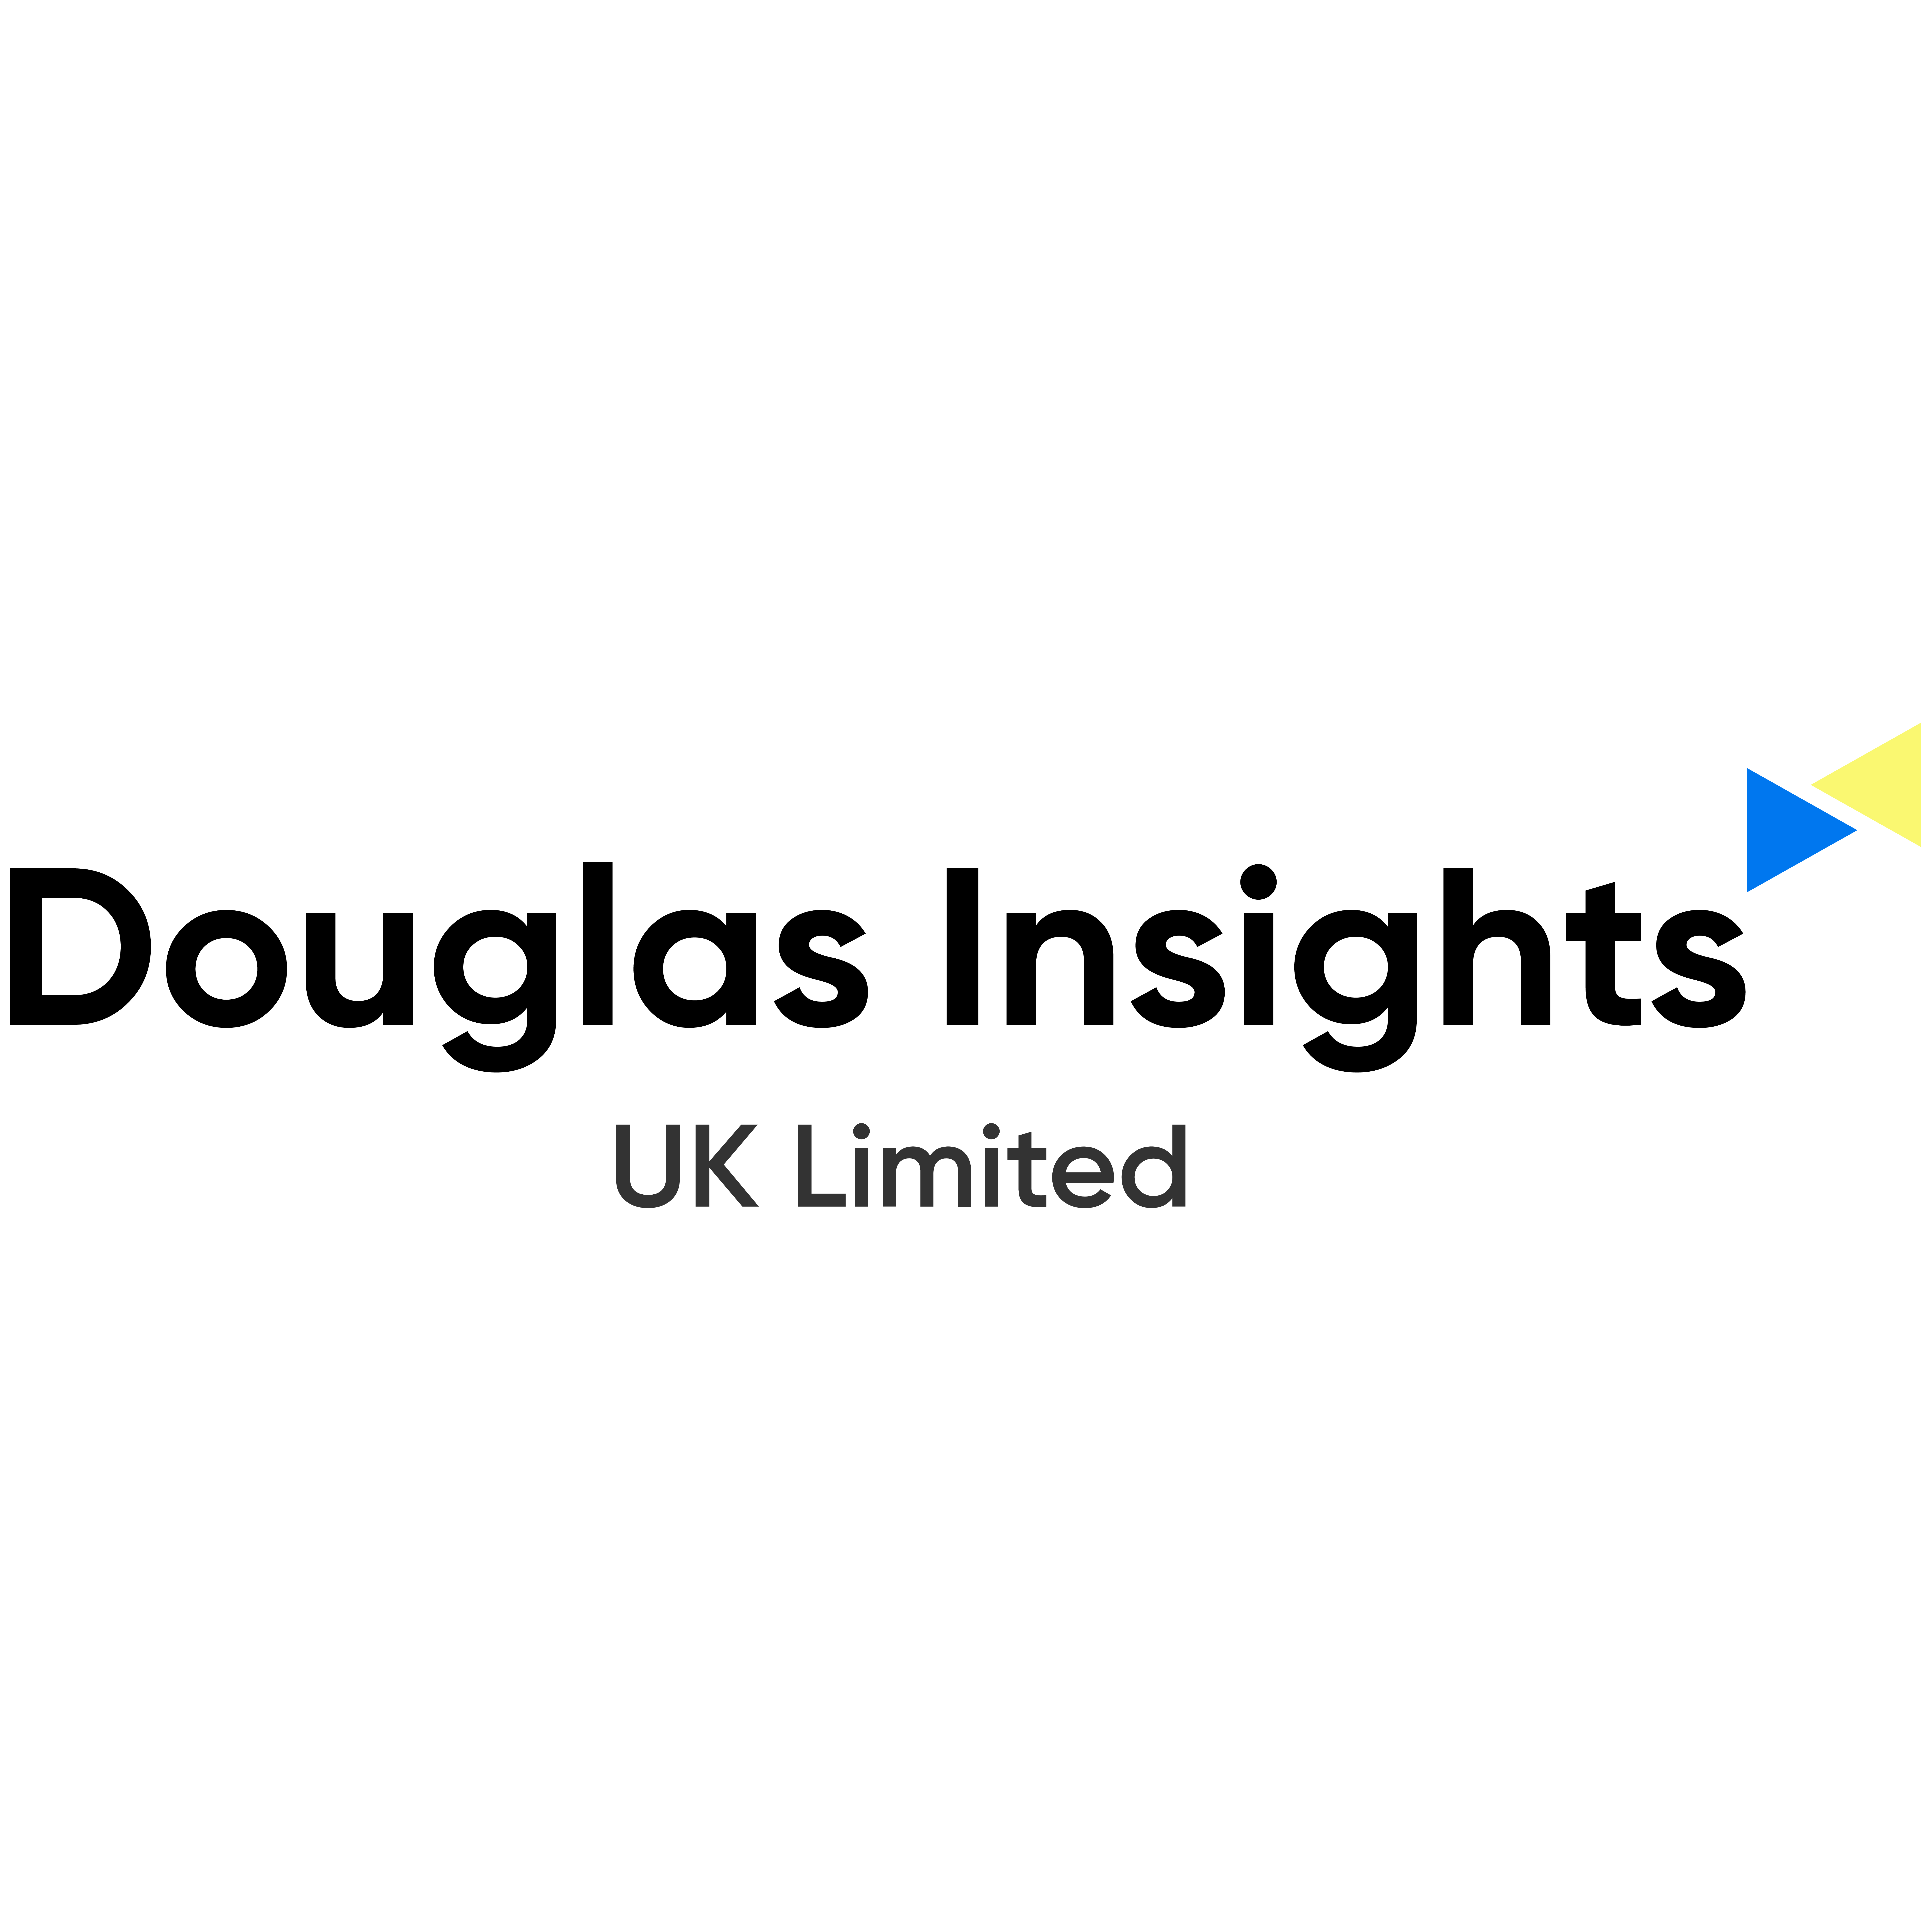 Non-Fungible Tokens (NFT) Market Is Growing Steadily With 33% CAGR Globally In The Coming Years – Report Available on Douglas Insights